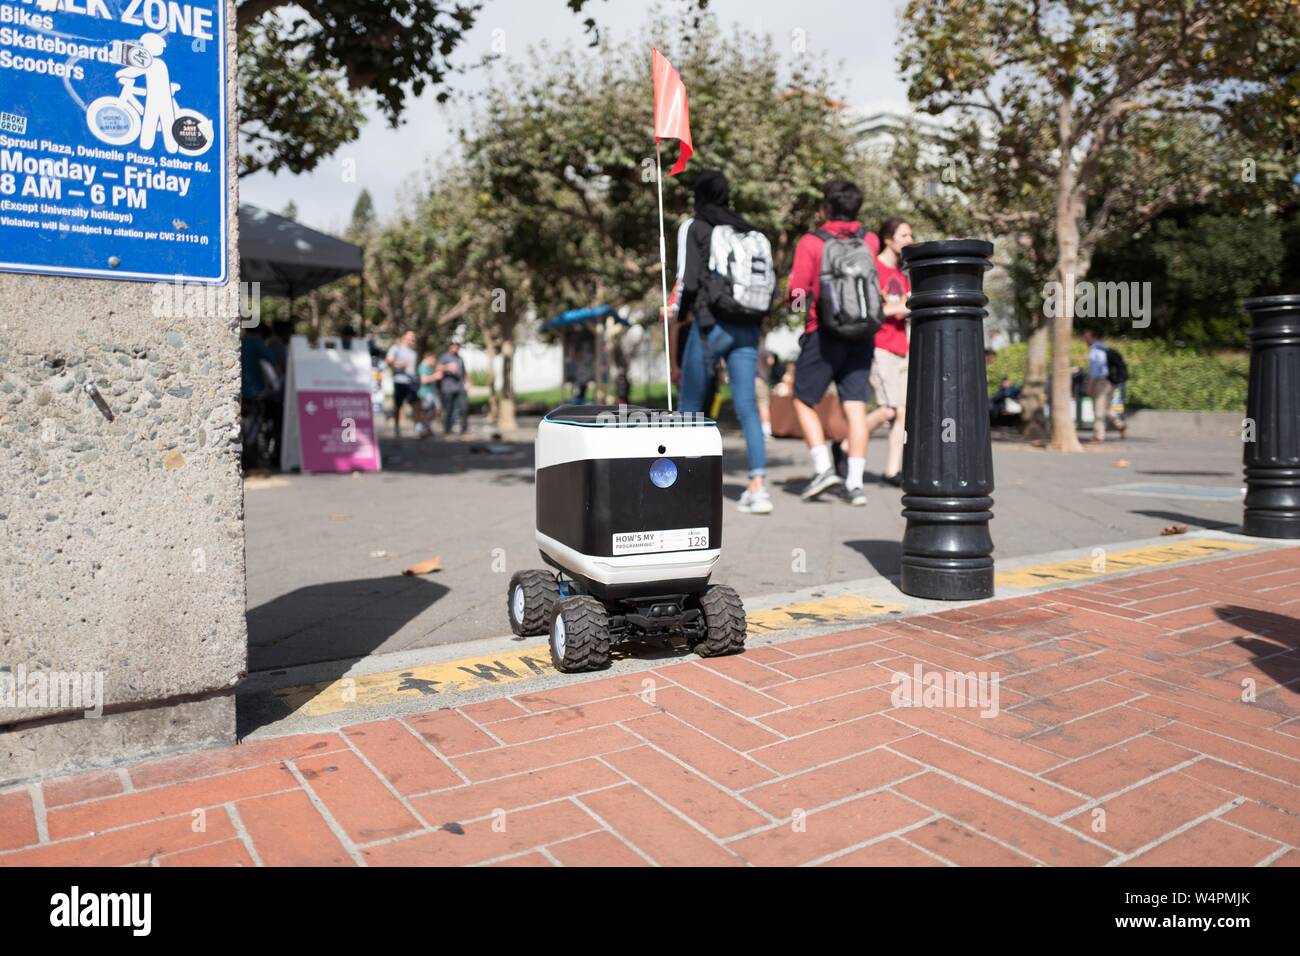 Low-angle view of Kiwi food delivery robot entering the campus of UC Berkeley in downtown Berkeley, California, October 9, 2018. () Stock Photo